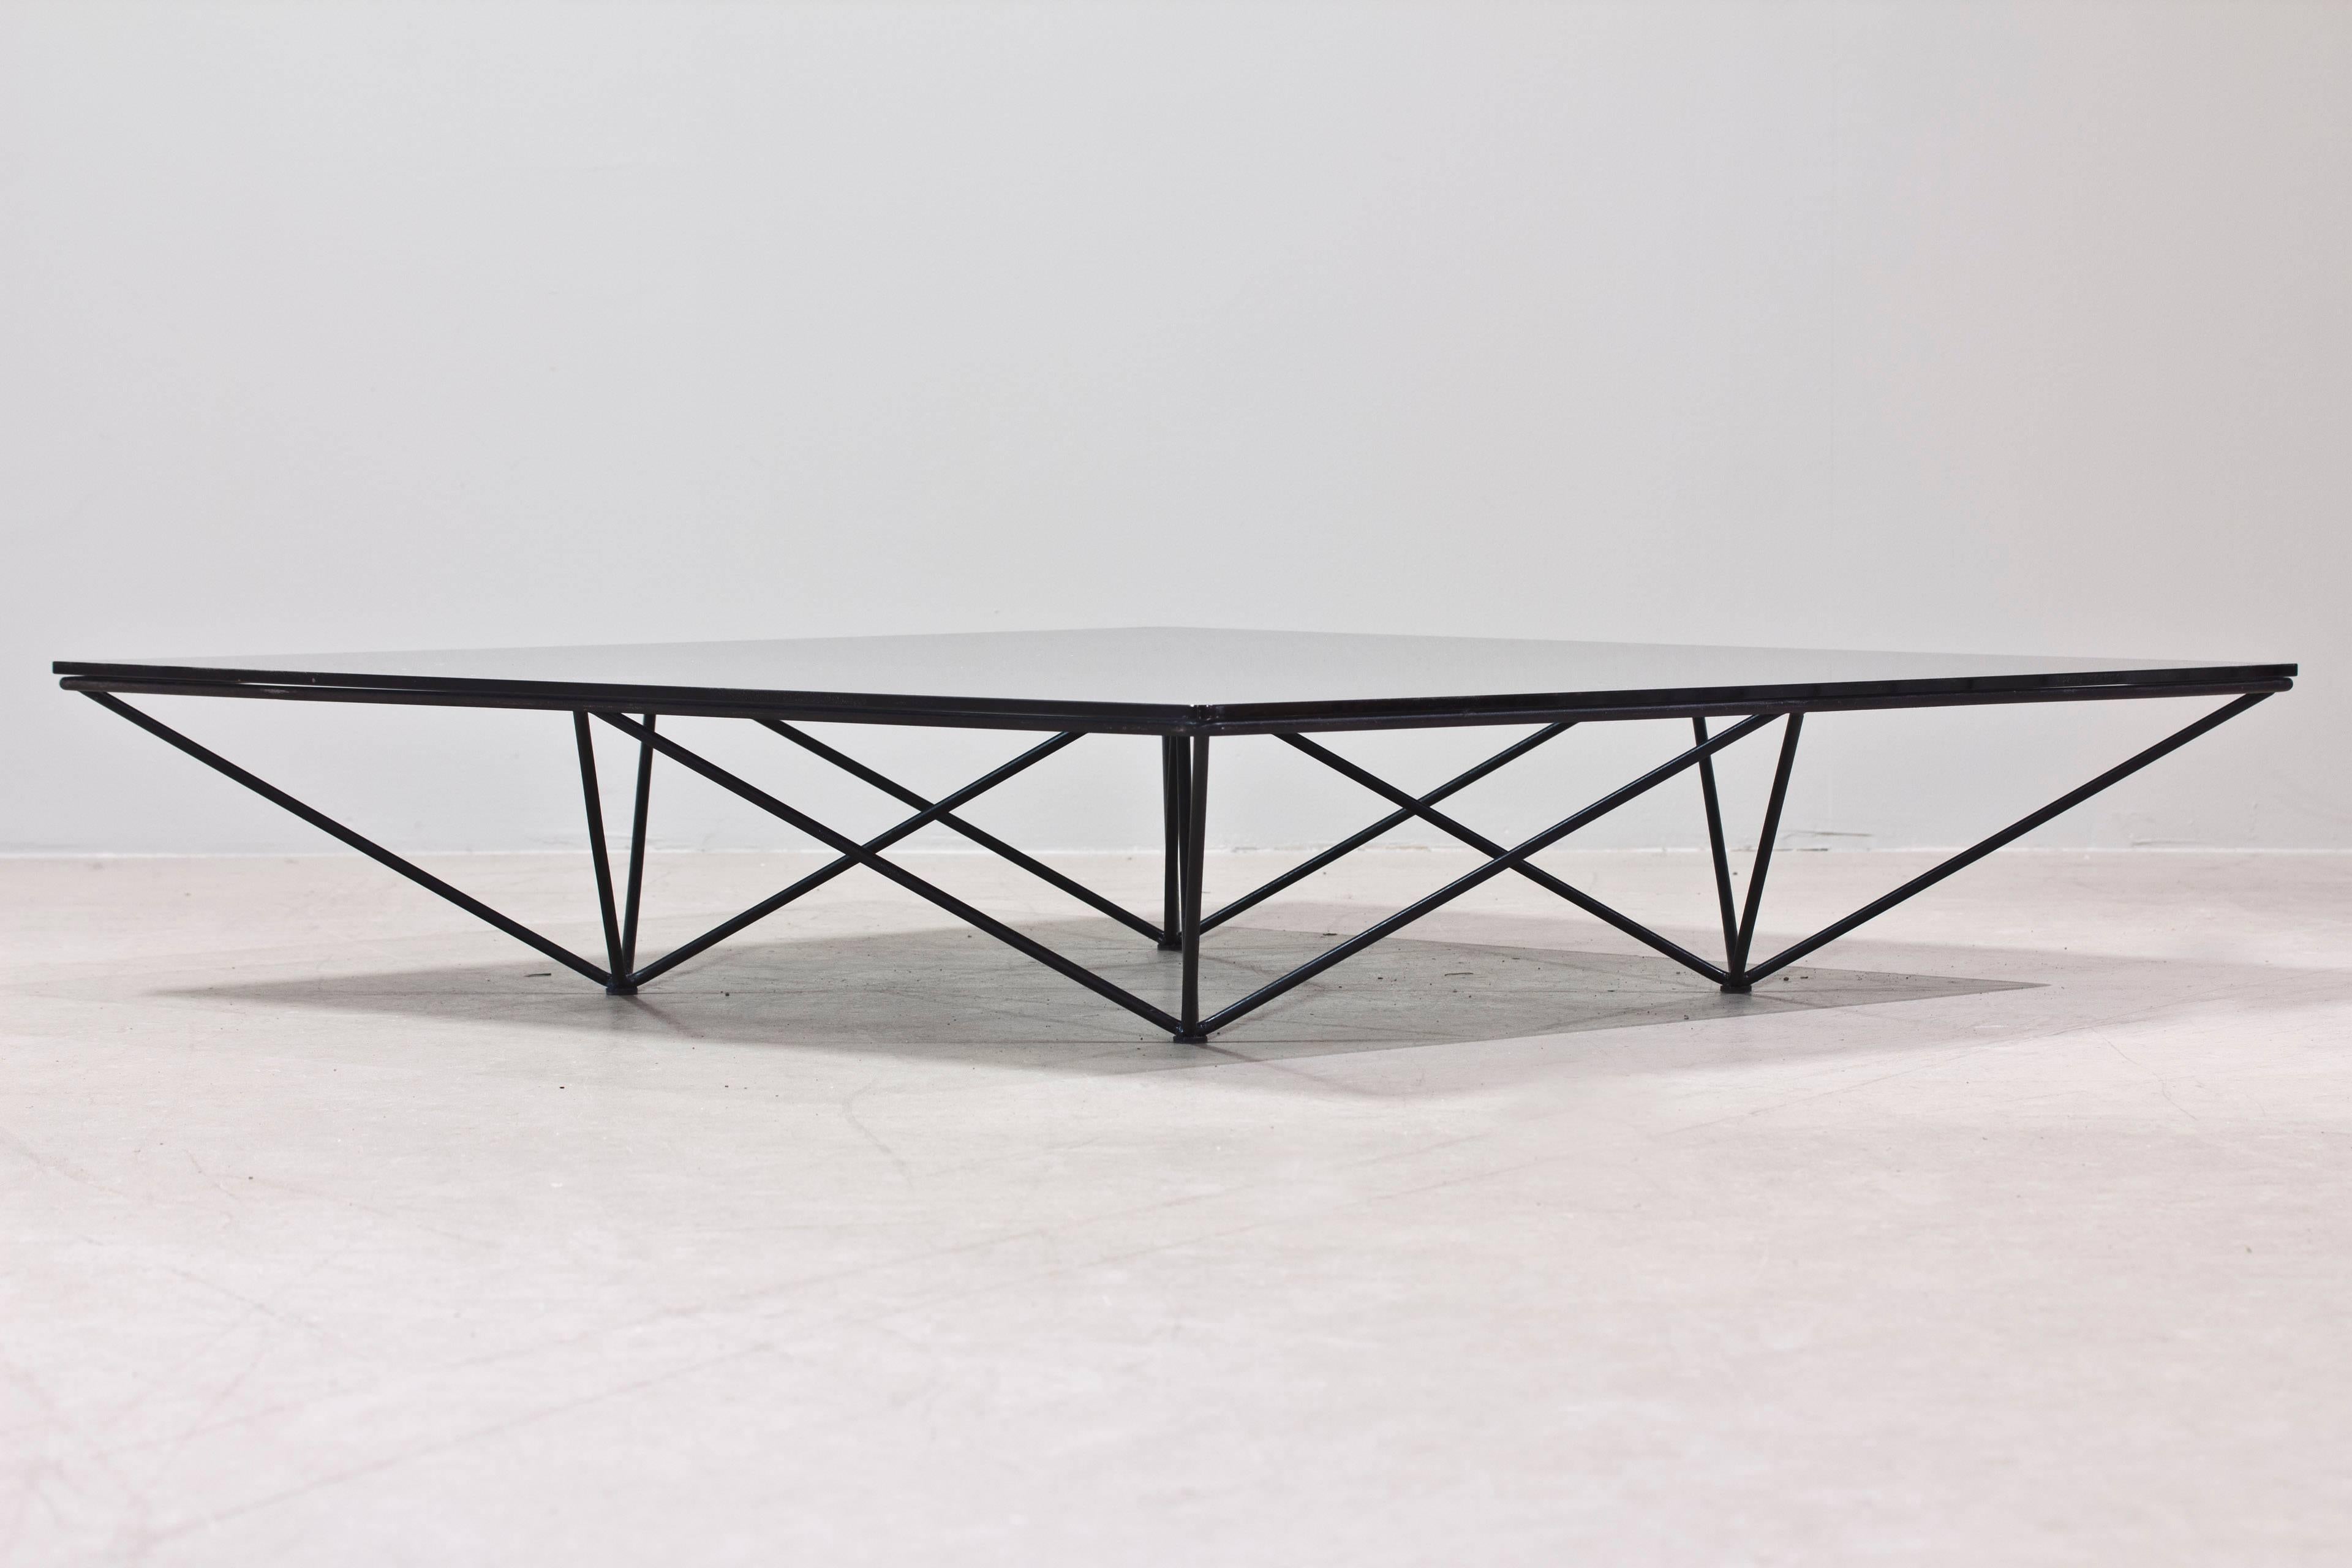 An Italian Alanda low coffee table with a black lacquered steel base and smoked glass top (probably new glass top). Designed by Paolo Piva, circa 1980. Produced by B&B Italia.